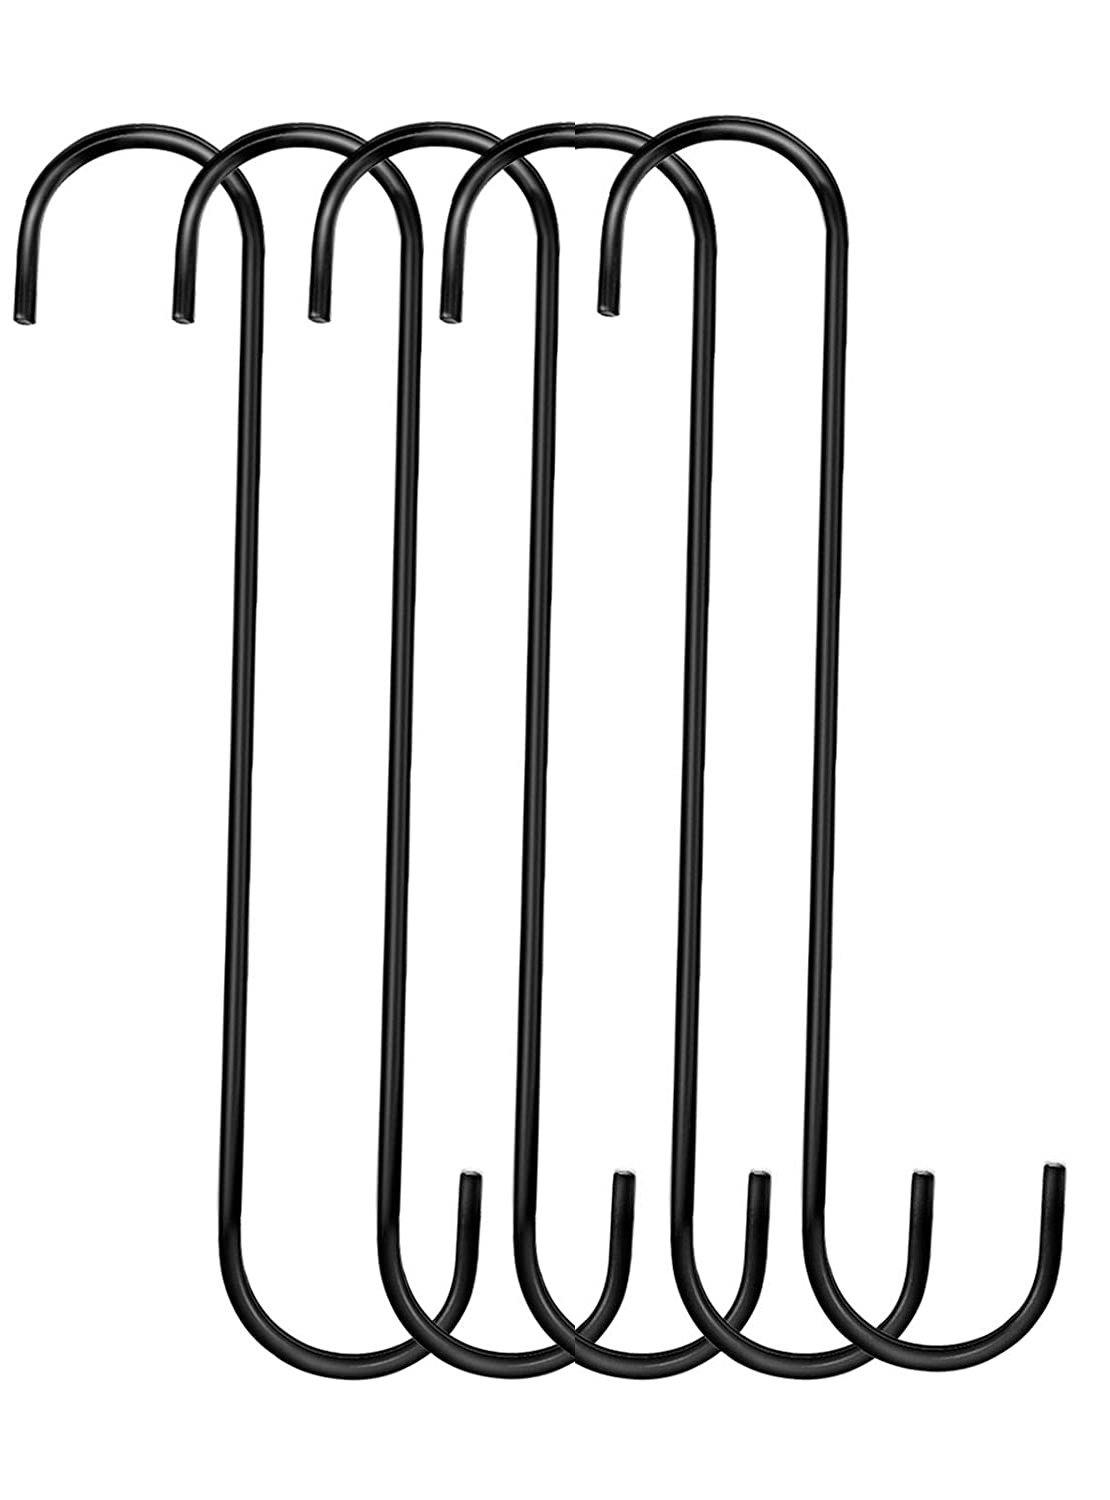 10 inches Long S Extension Hooks, 5 Pack S Hooks freeshipping - Ecofynd